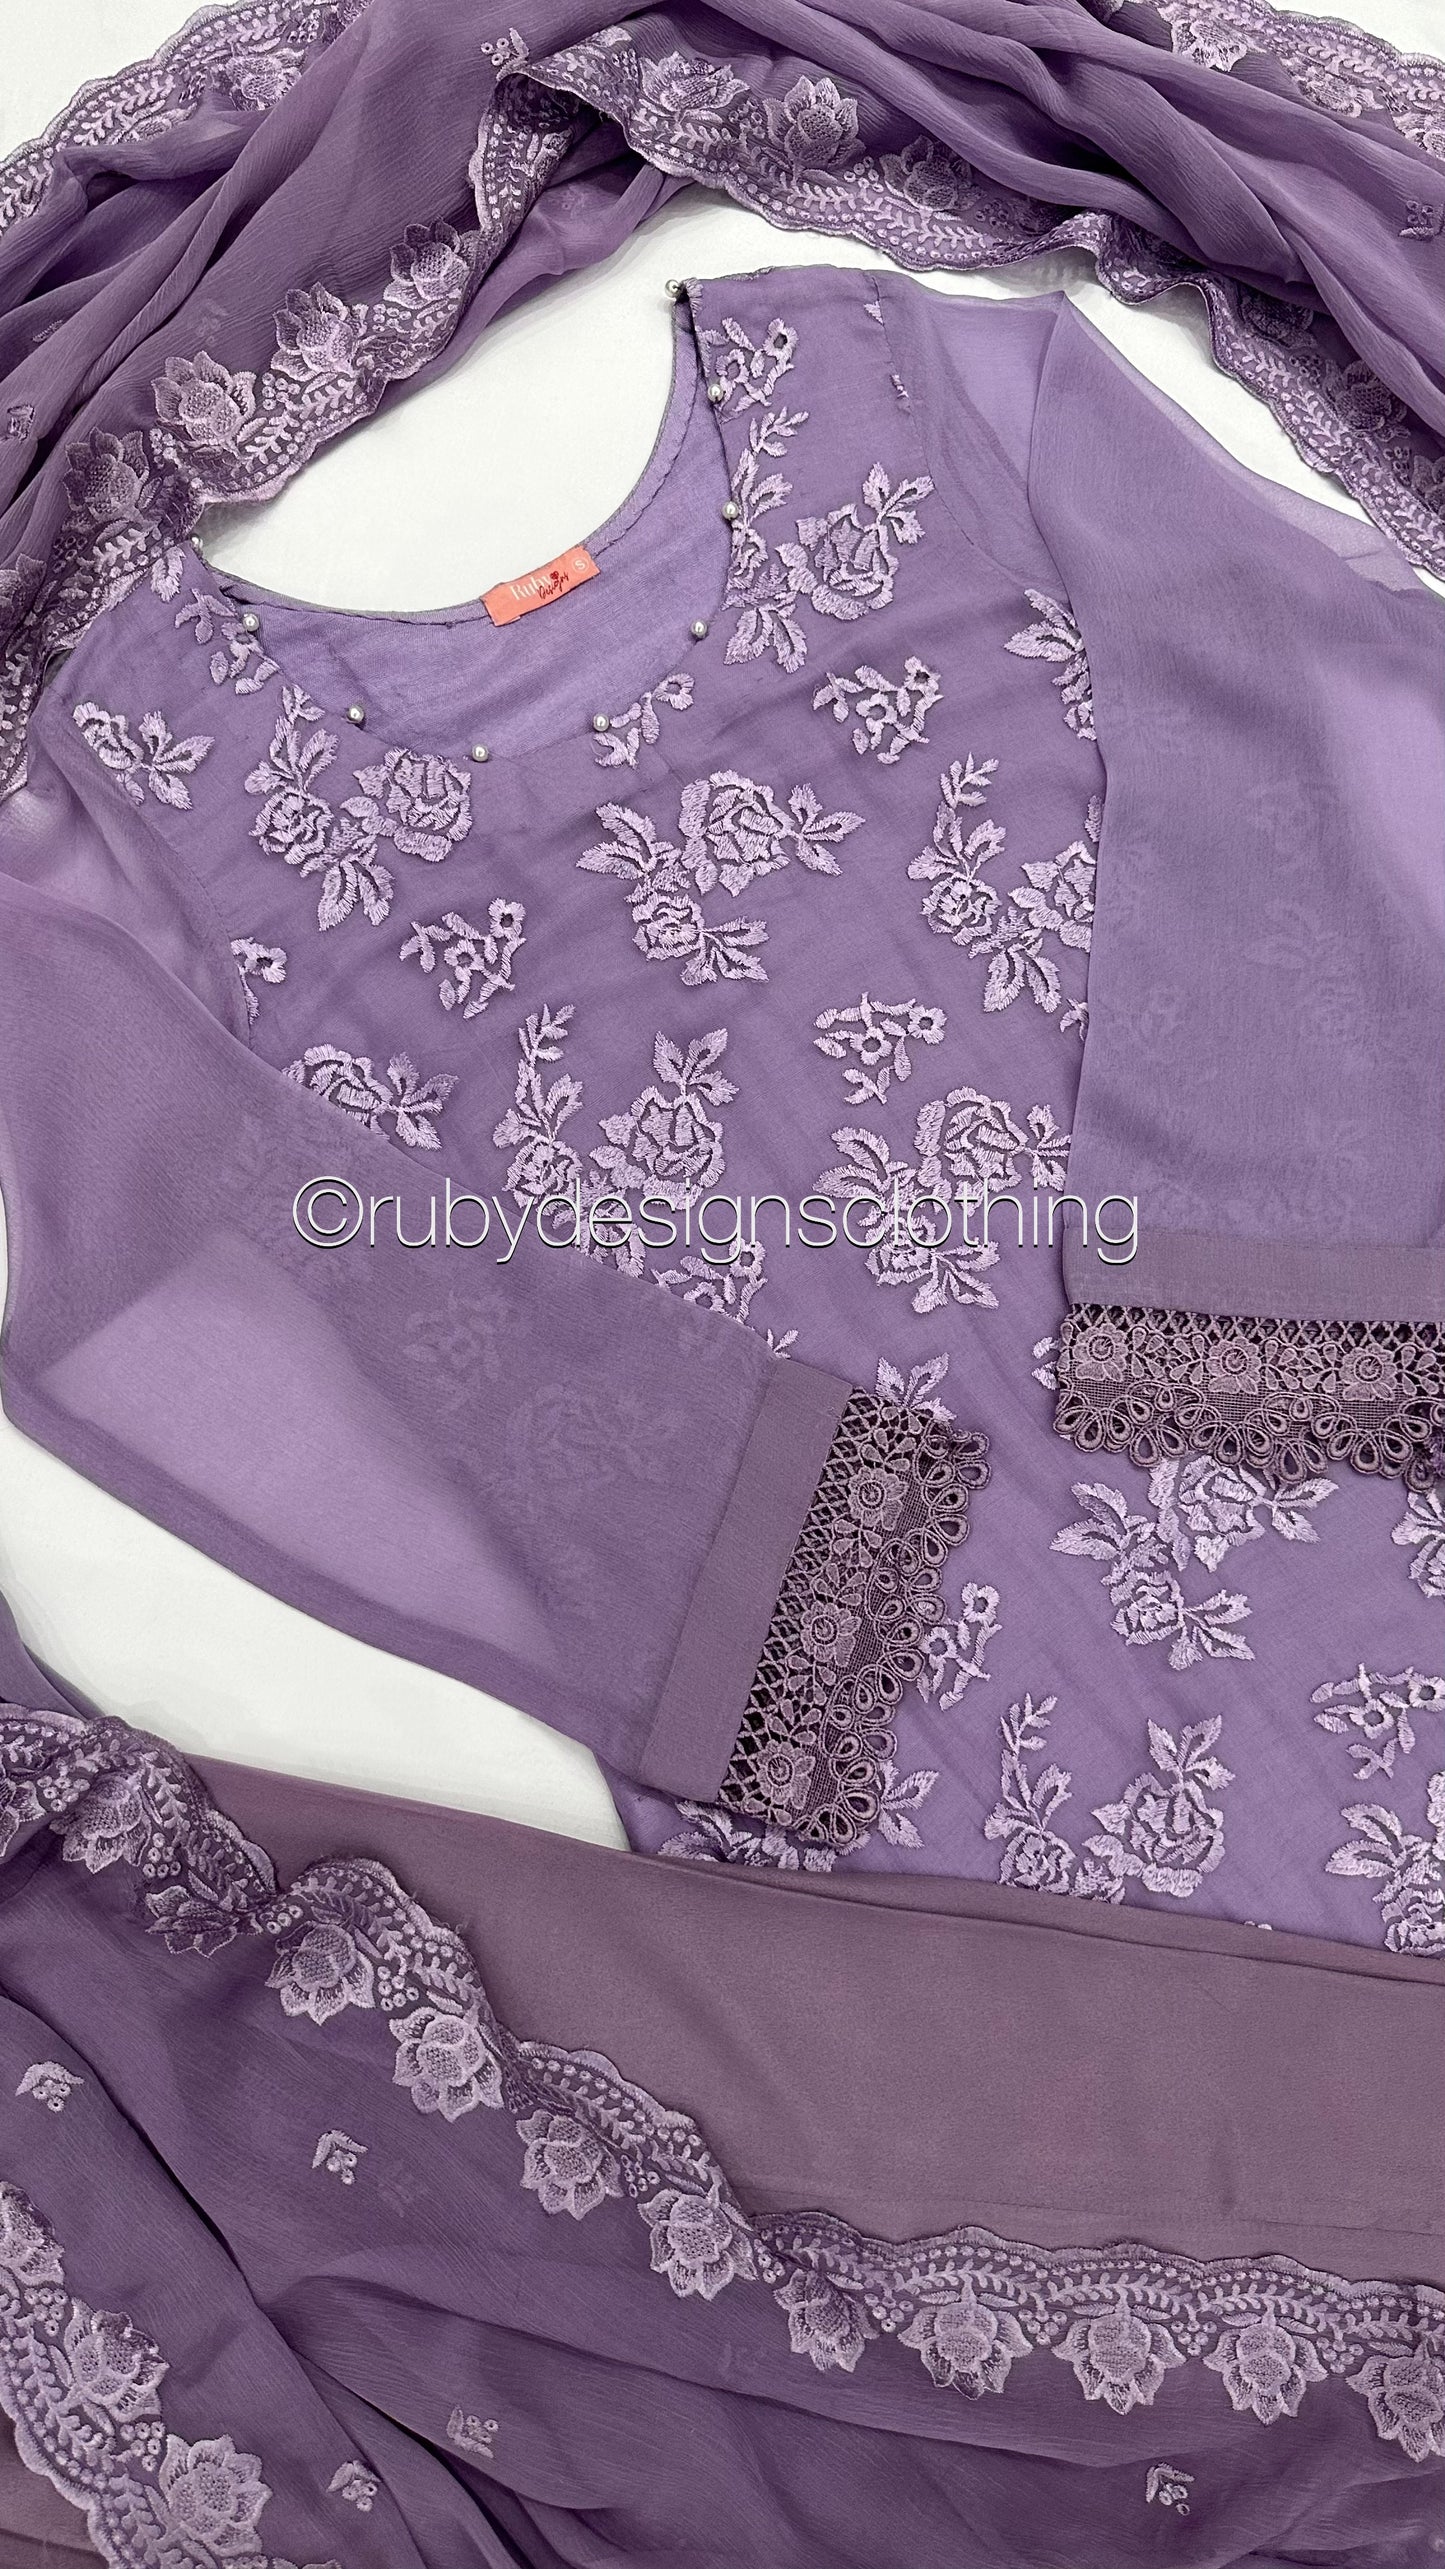 MEHER Lilac - 3 Piece Embroidered Chiffon Suit with Cut Out Details